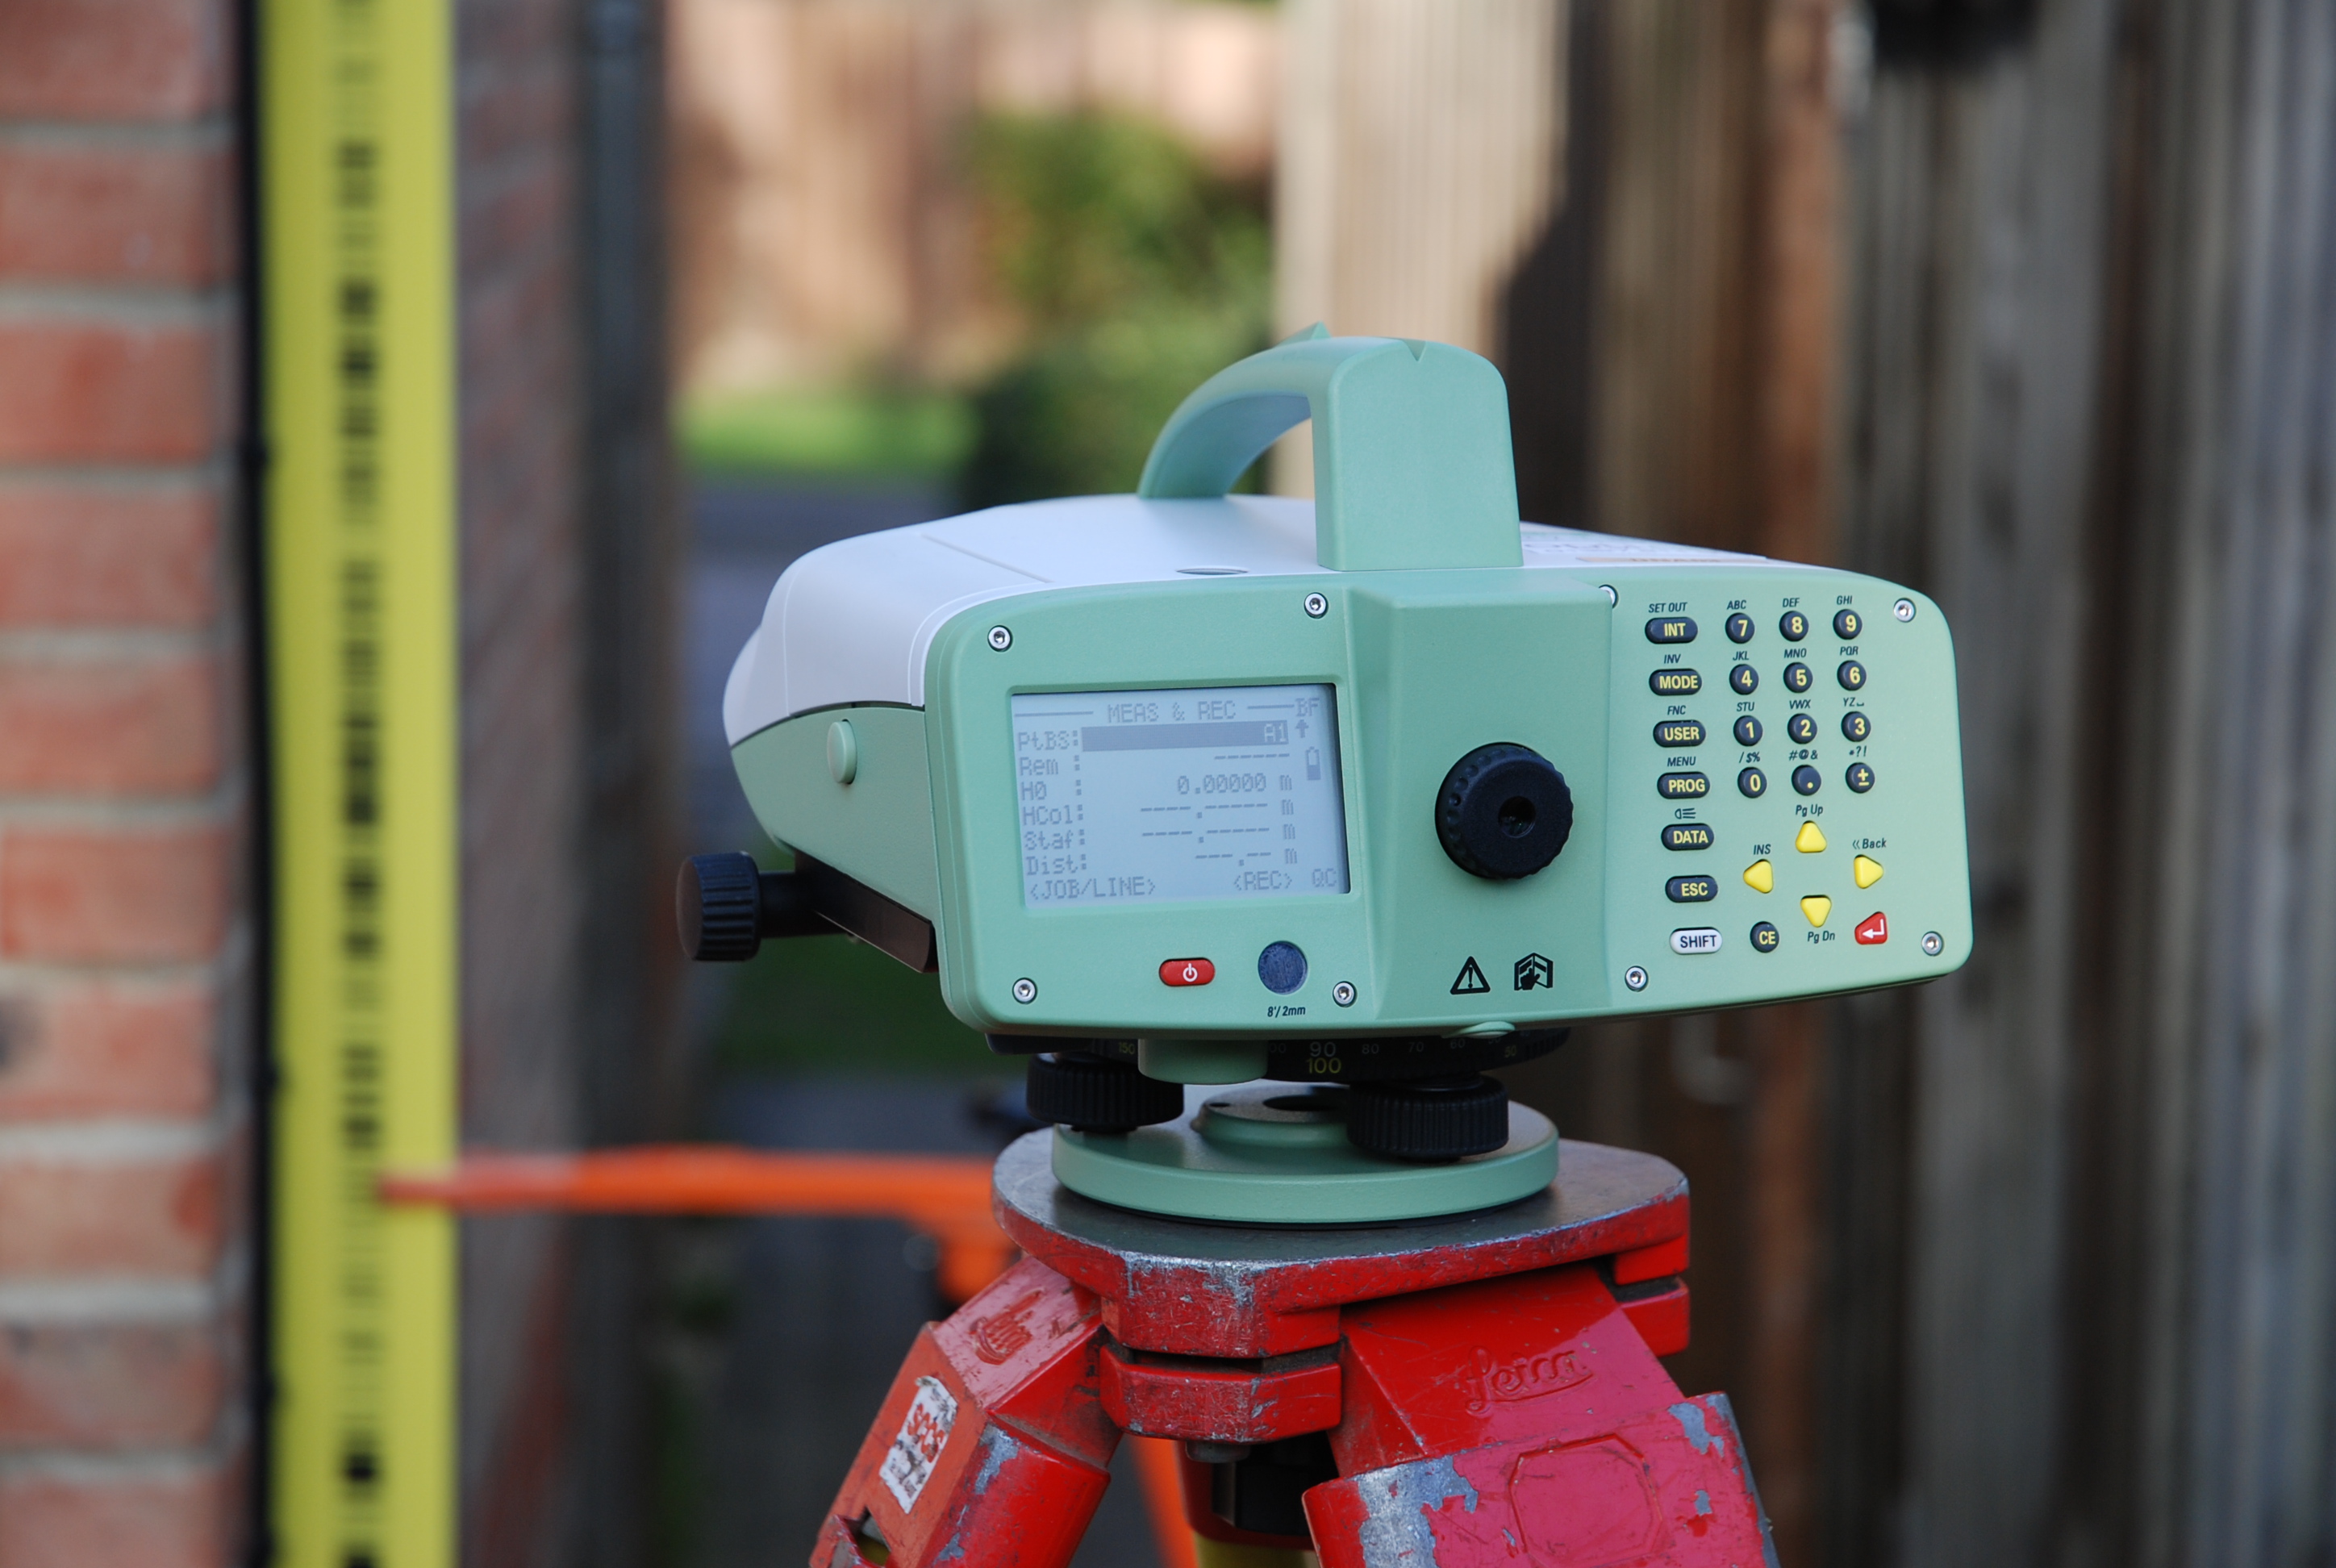 Trigon Survey & Investigations use the very latest surveying equipment to ensure the highest standard of recording accuracy. Find out more on our website.